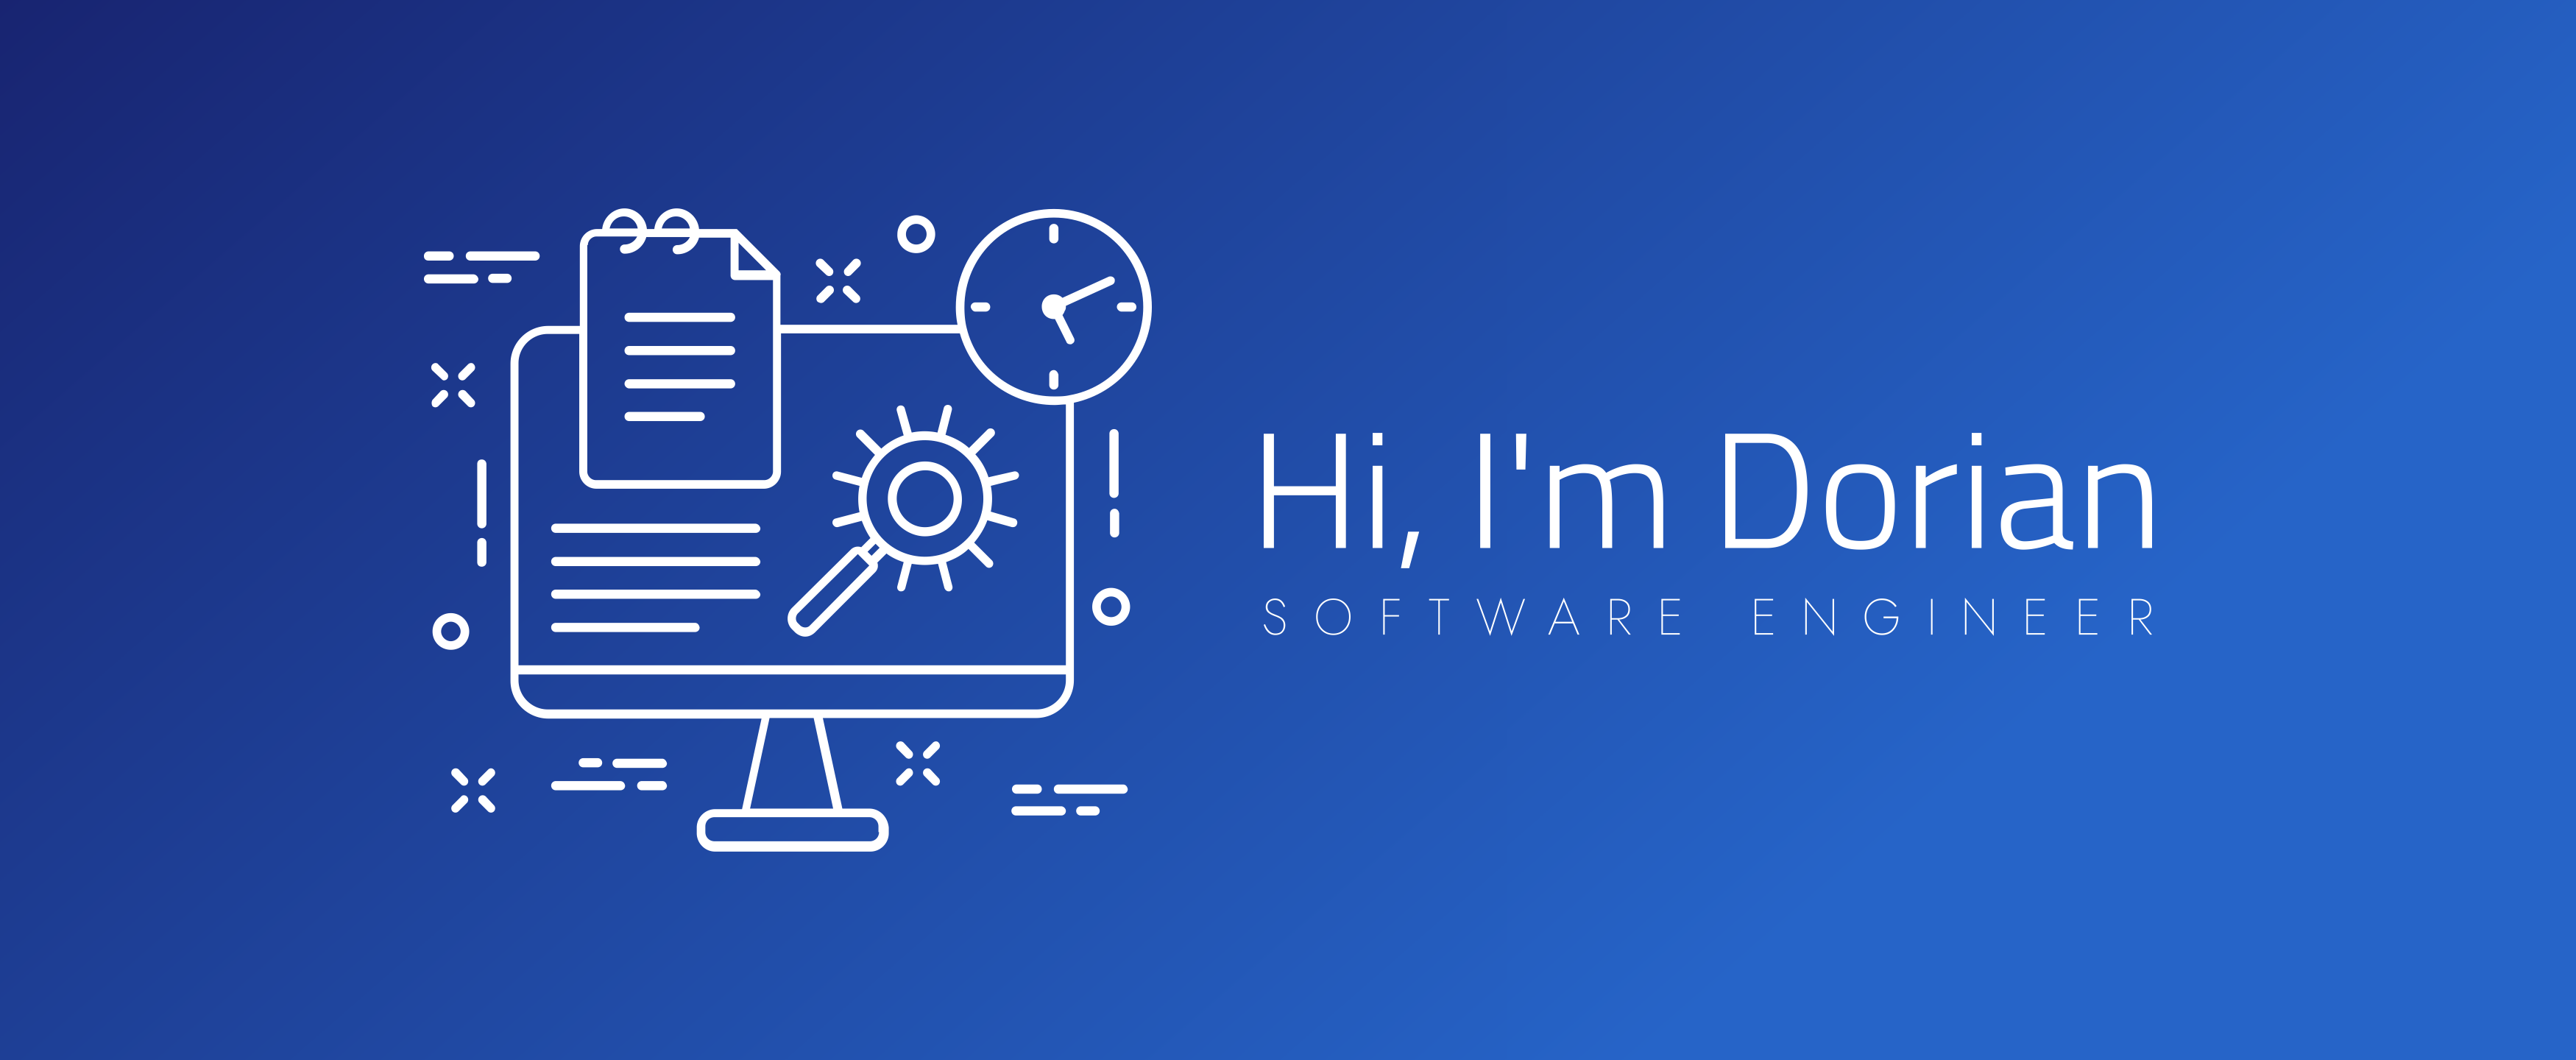 Logo that says 'Hi, I'm Dorian' with 'software engineer' as the subtitle